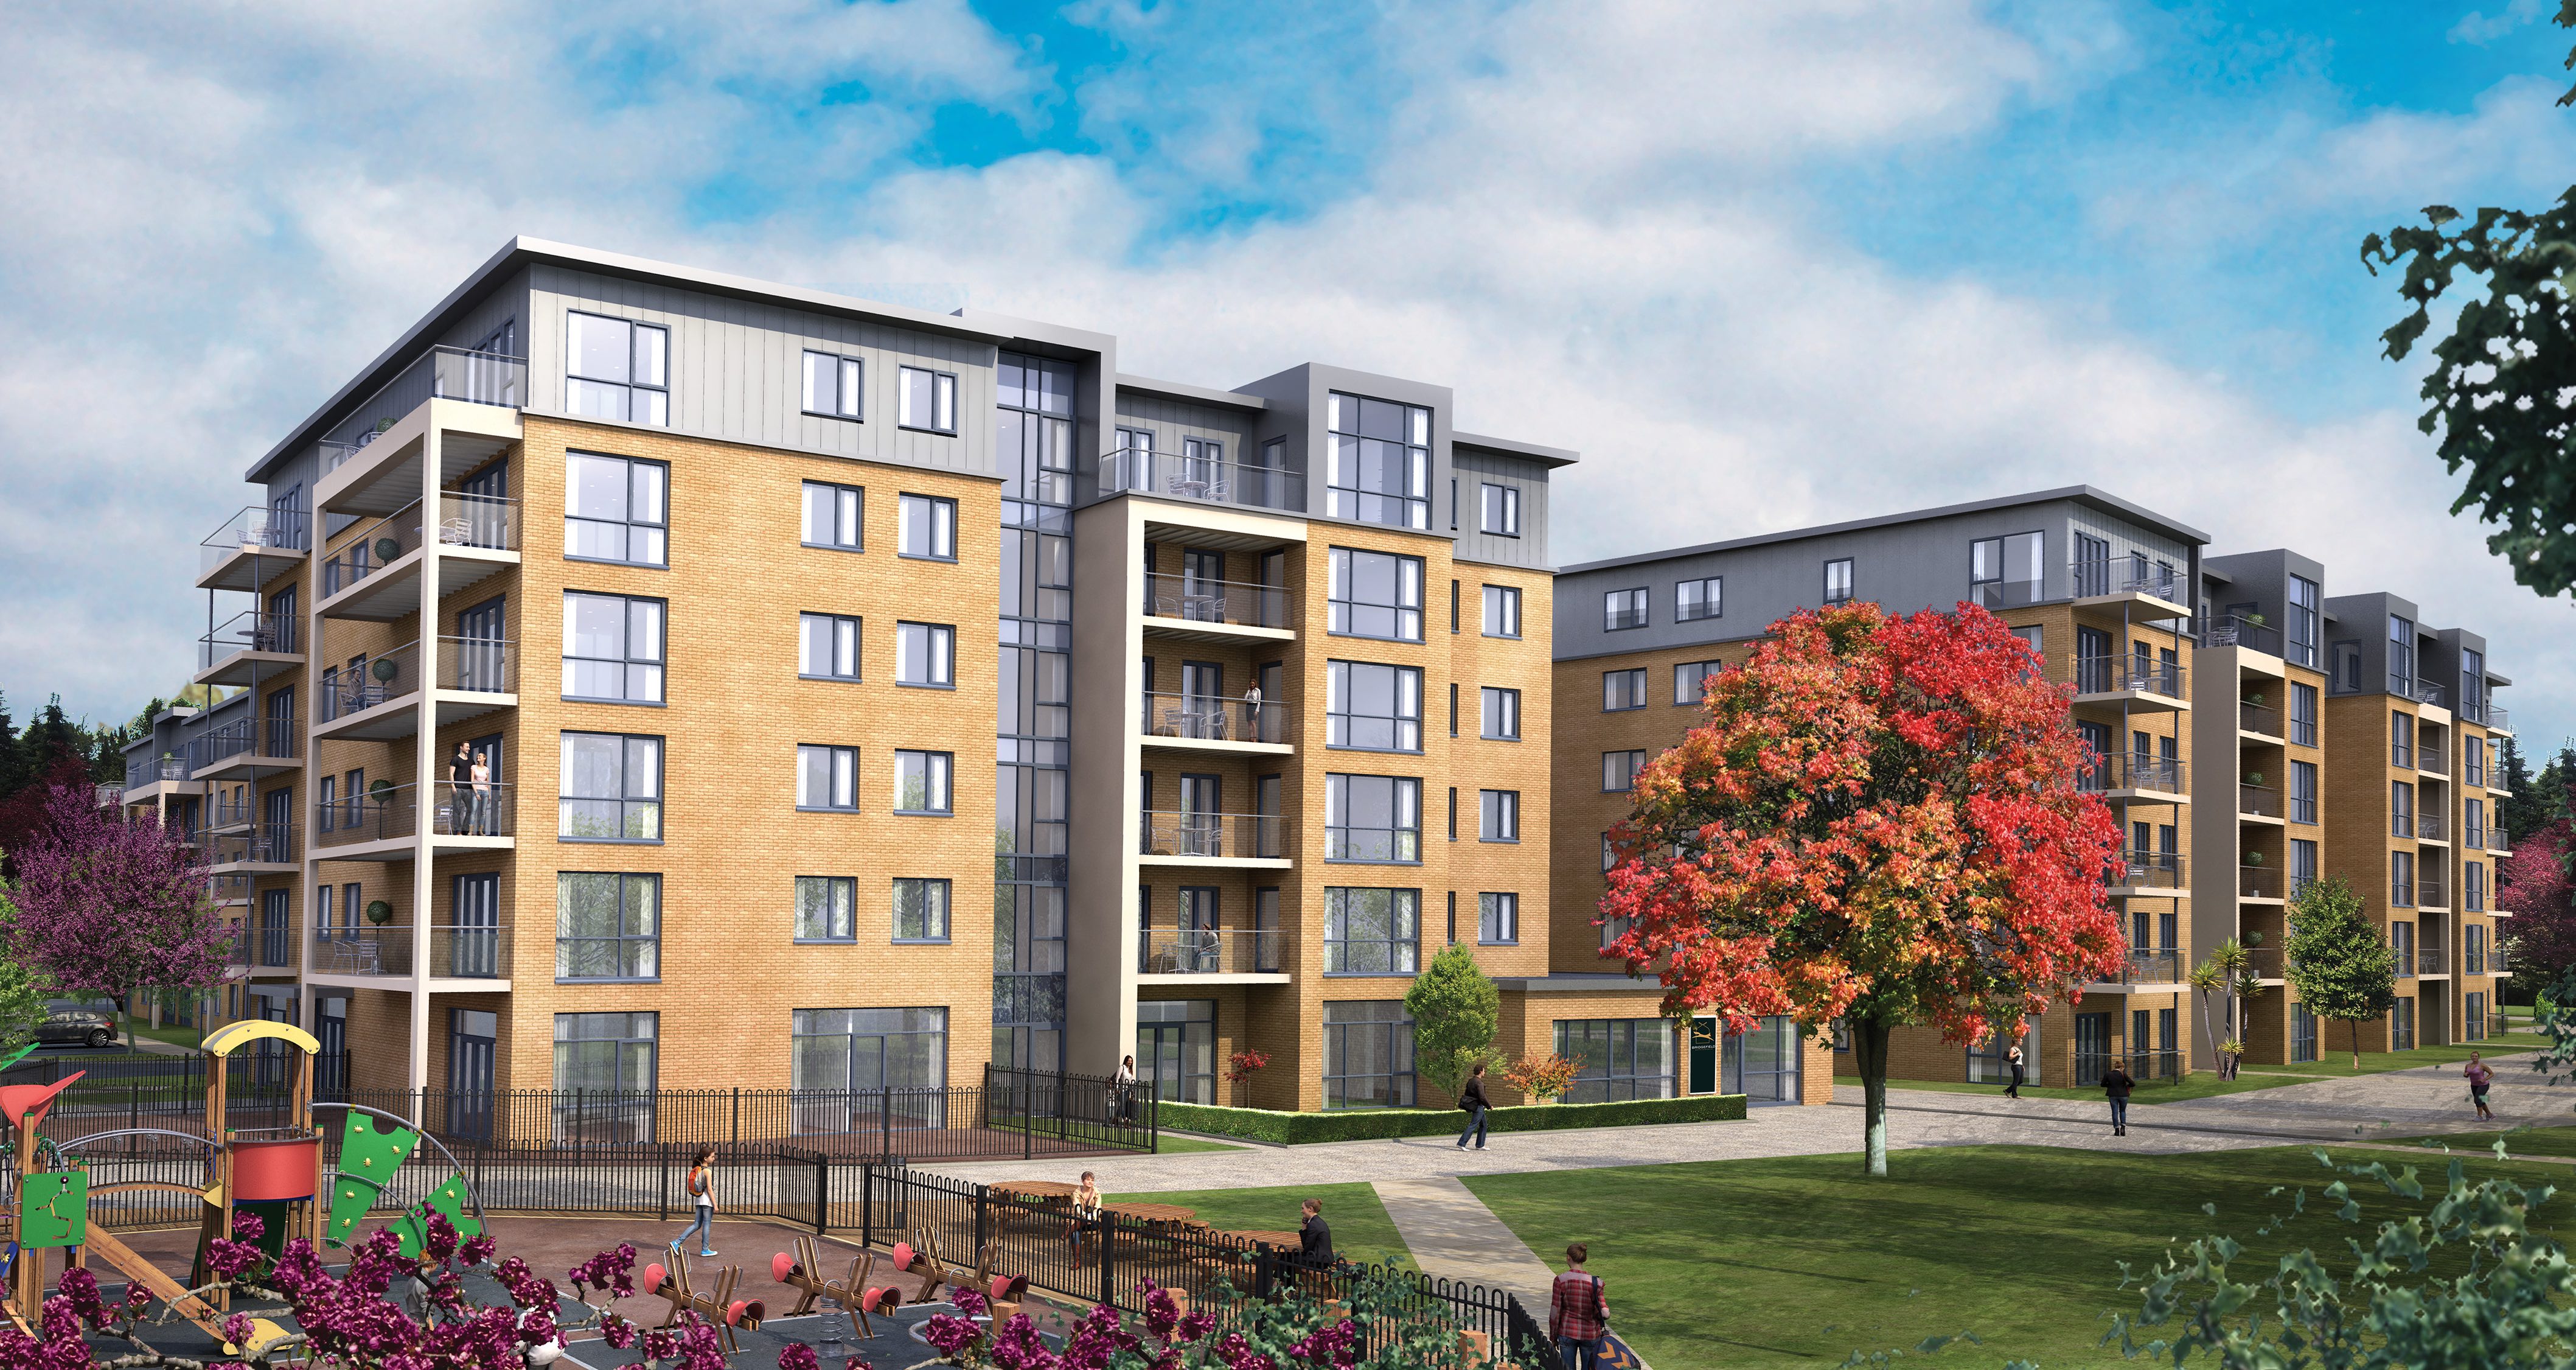 QuadReal and Round Hill Capital joint venture acquires first Build-To-Rent development scheme in North Dublin, Ireland